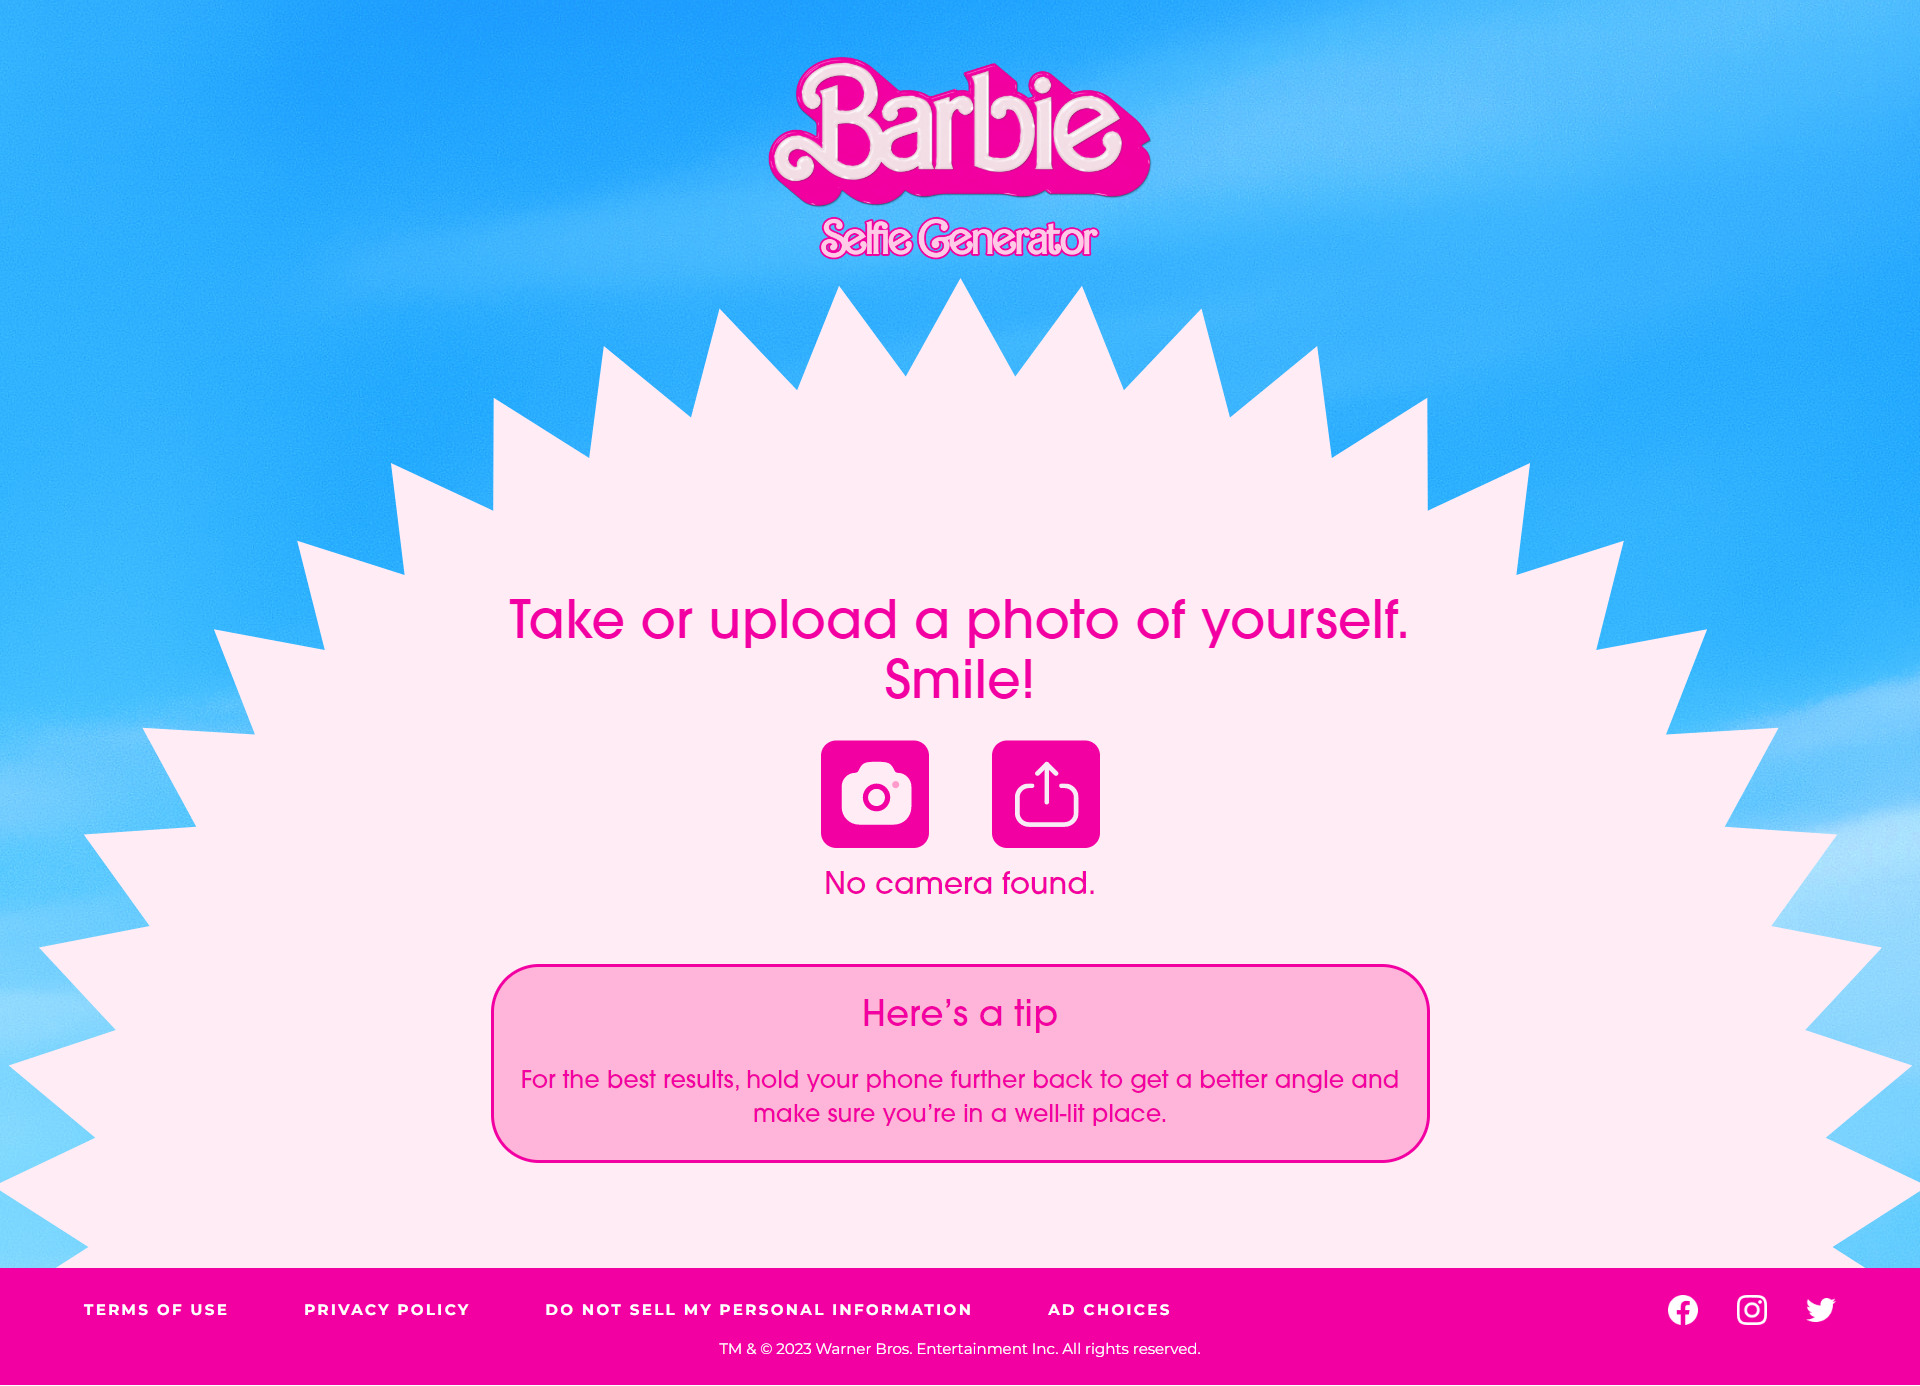 How To Make Your Own Barbie Poster Barbie Selfie Generator Meme Template